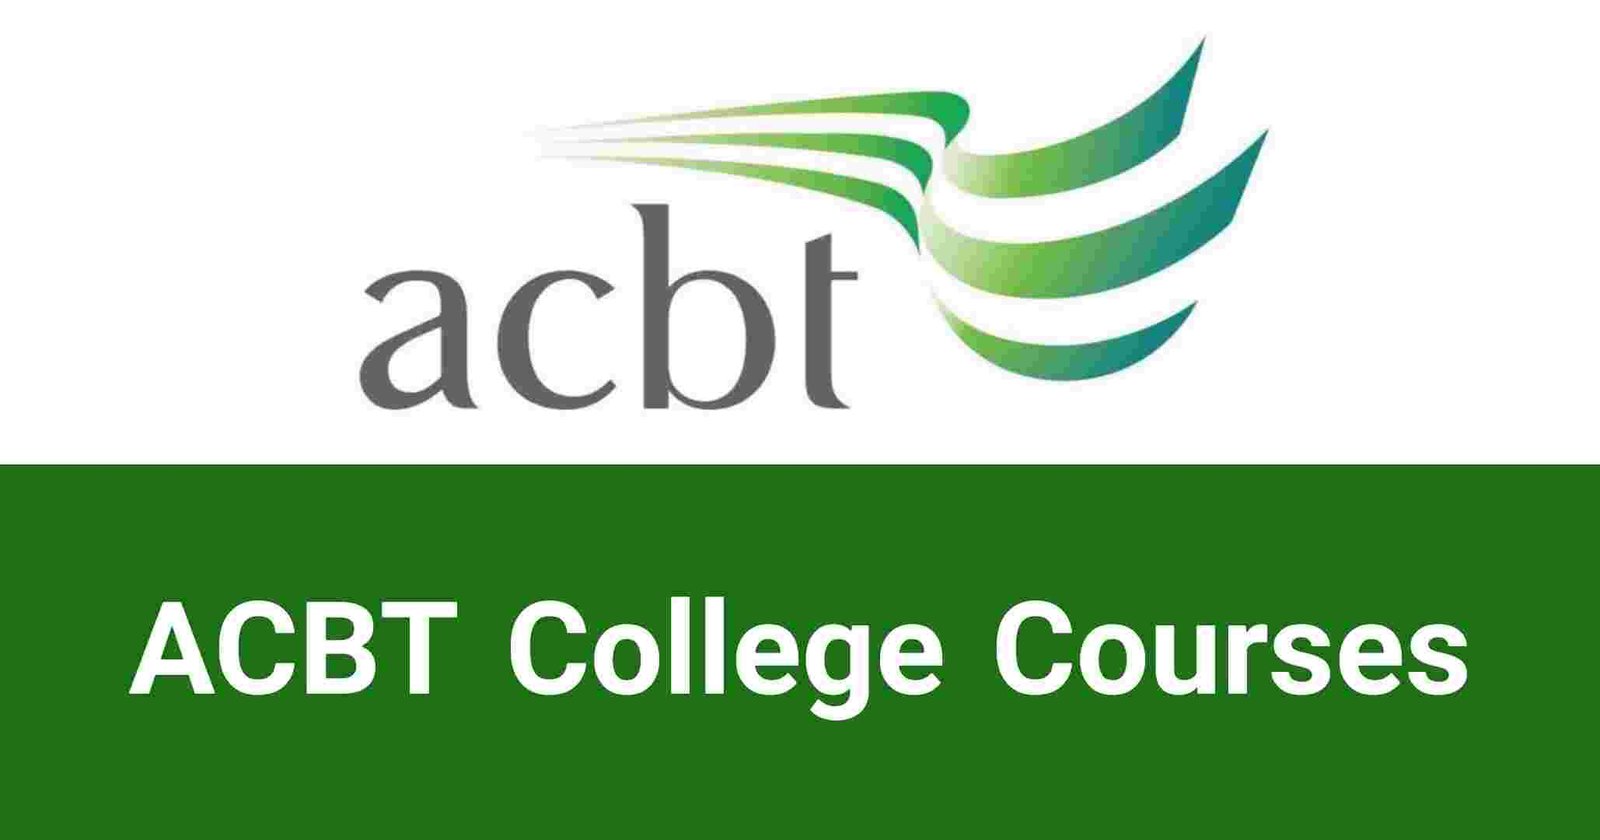 ACBT College Courses